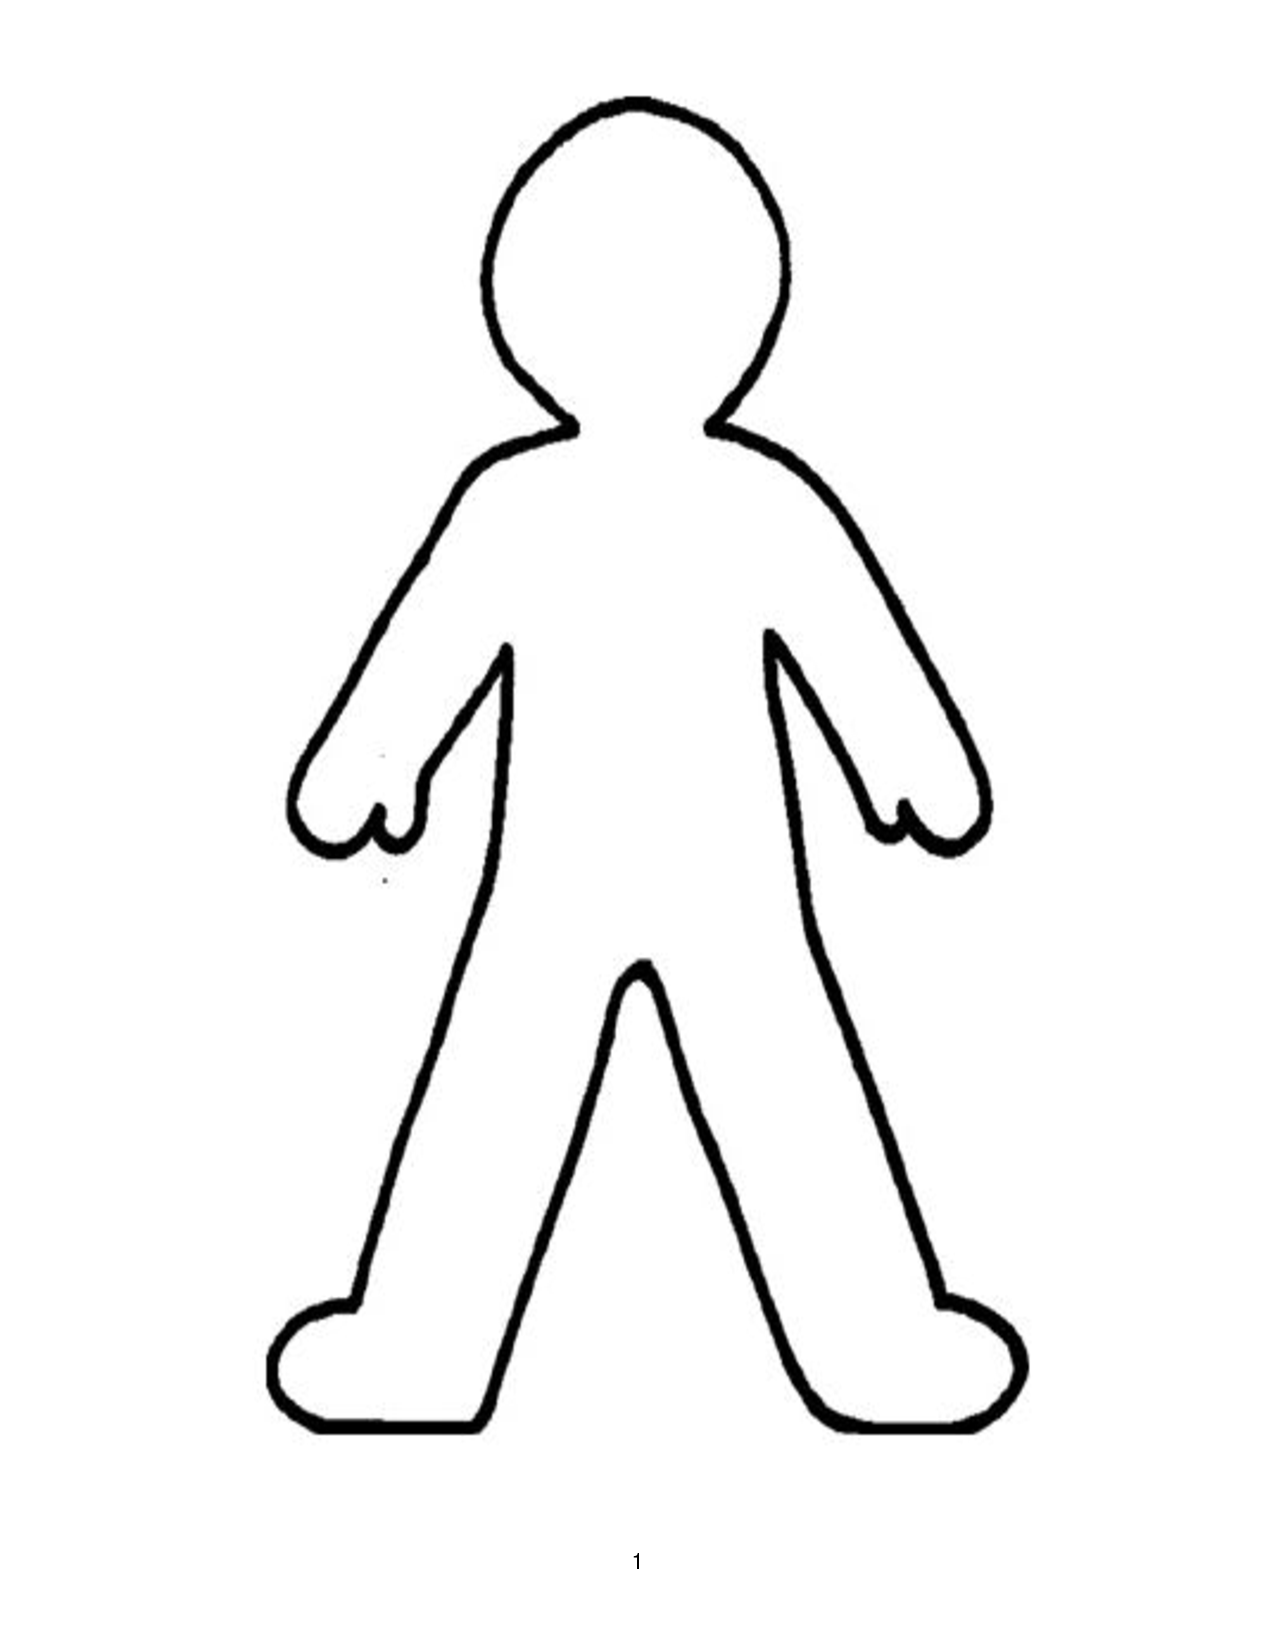 Person outline drawing - ClipartFox